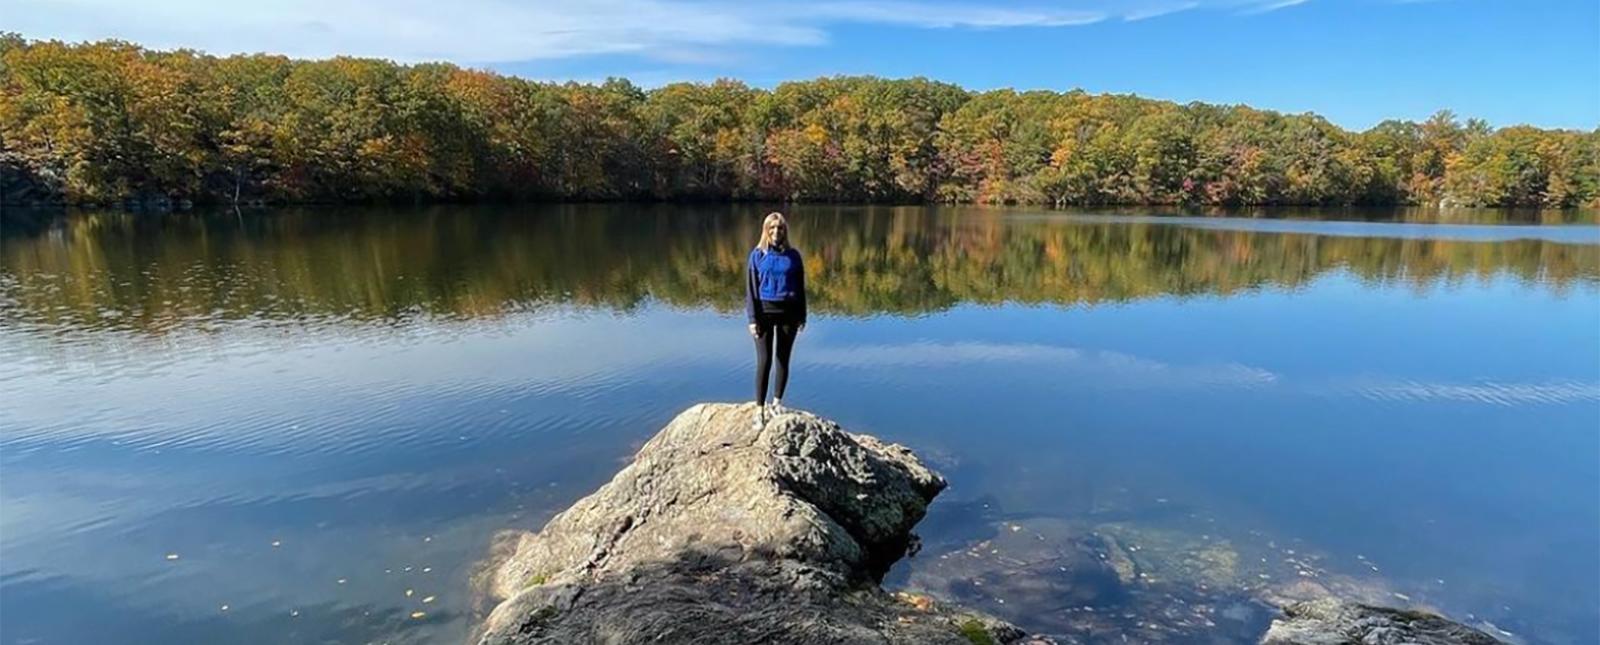 a woman standing on a rock in front of water reflecting trees and sky (Instagram@lenahrystyk)